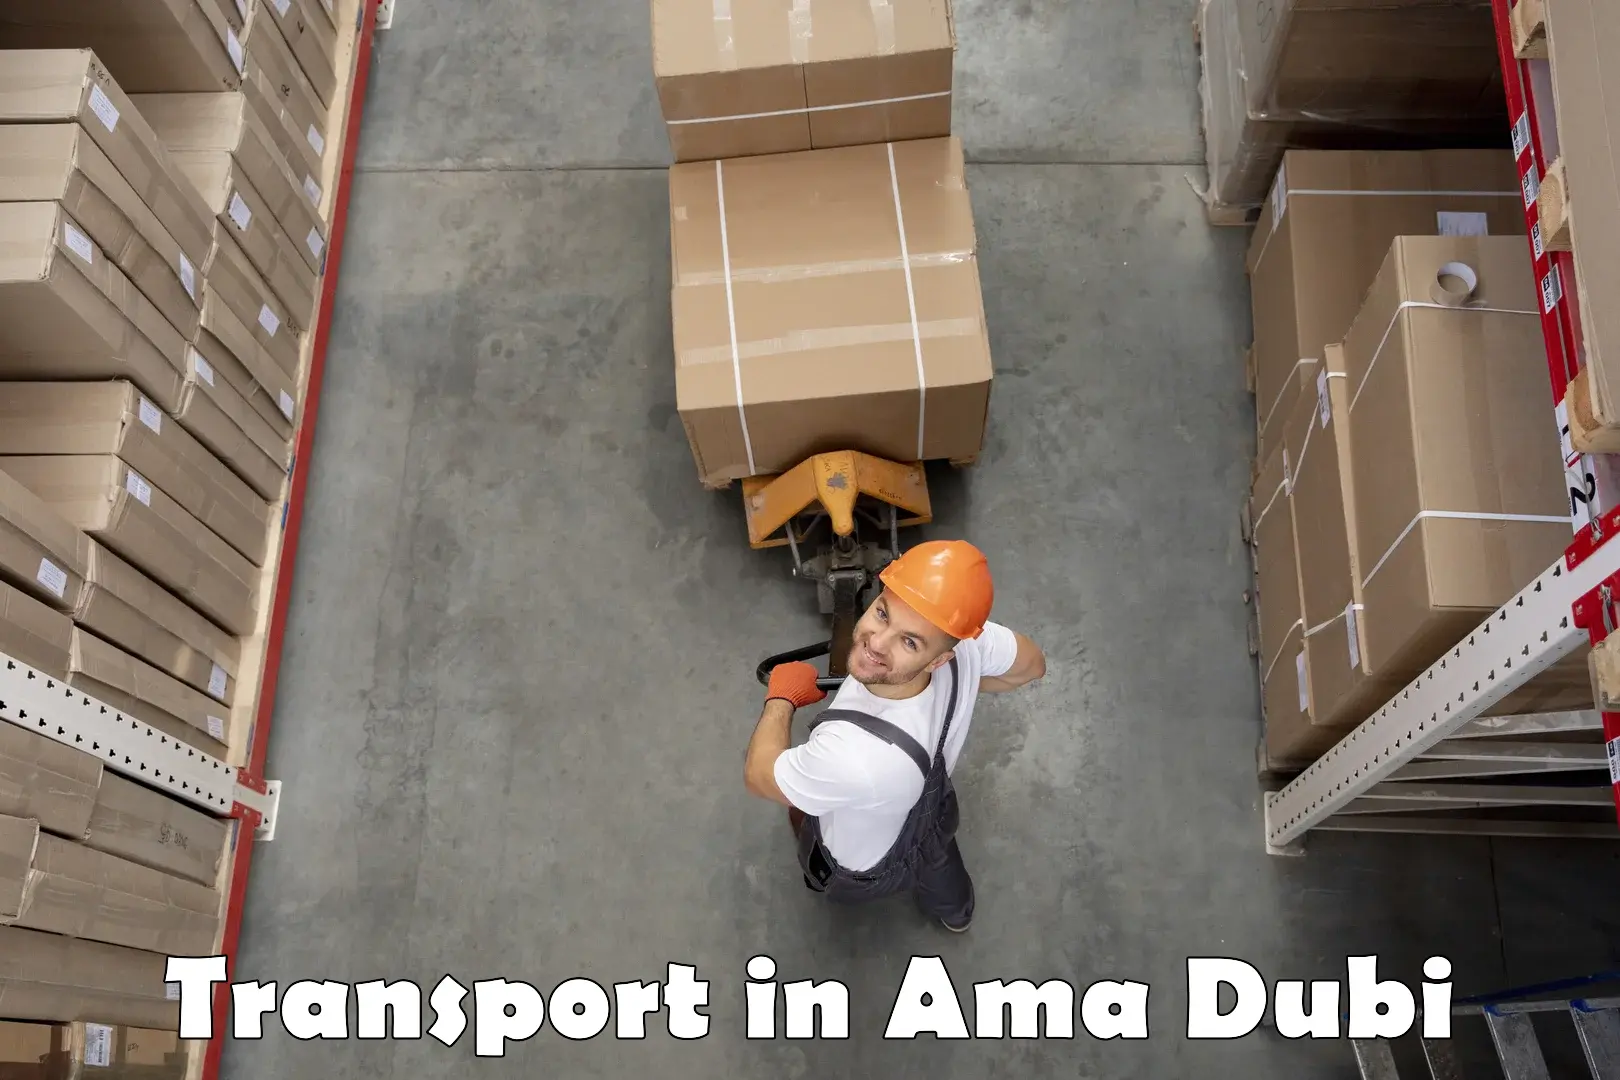 Transport services in Ama Dubi